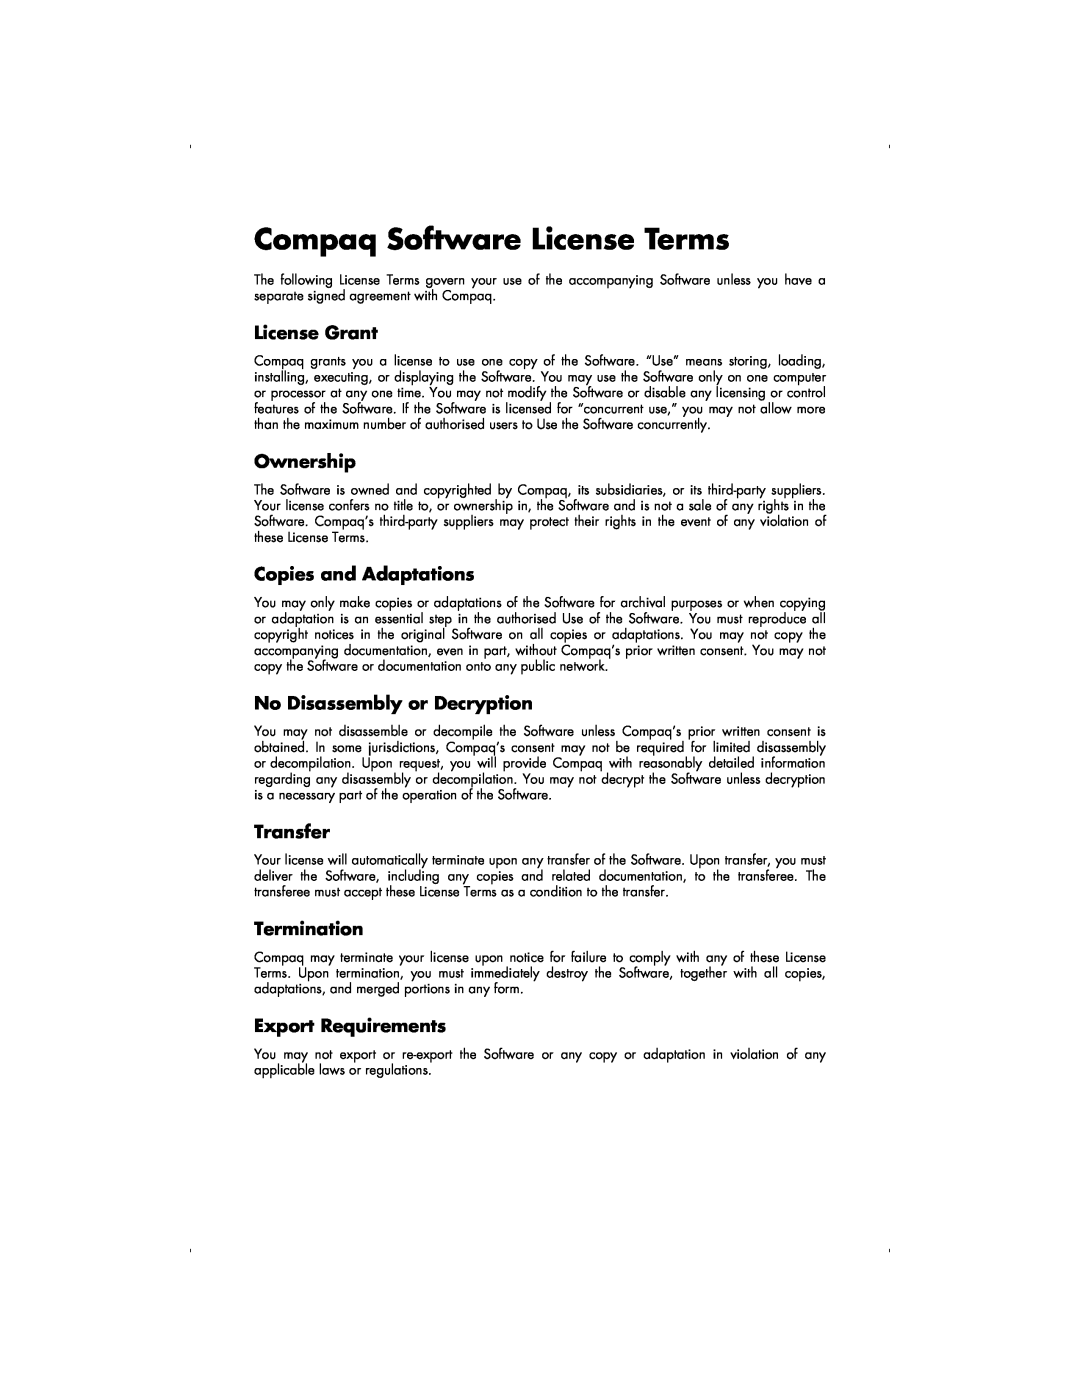 HP S3190UK Compaq Software License Terms, License Grant, Ownership, Copies and Adaptations, No Disassembly or Decryption 